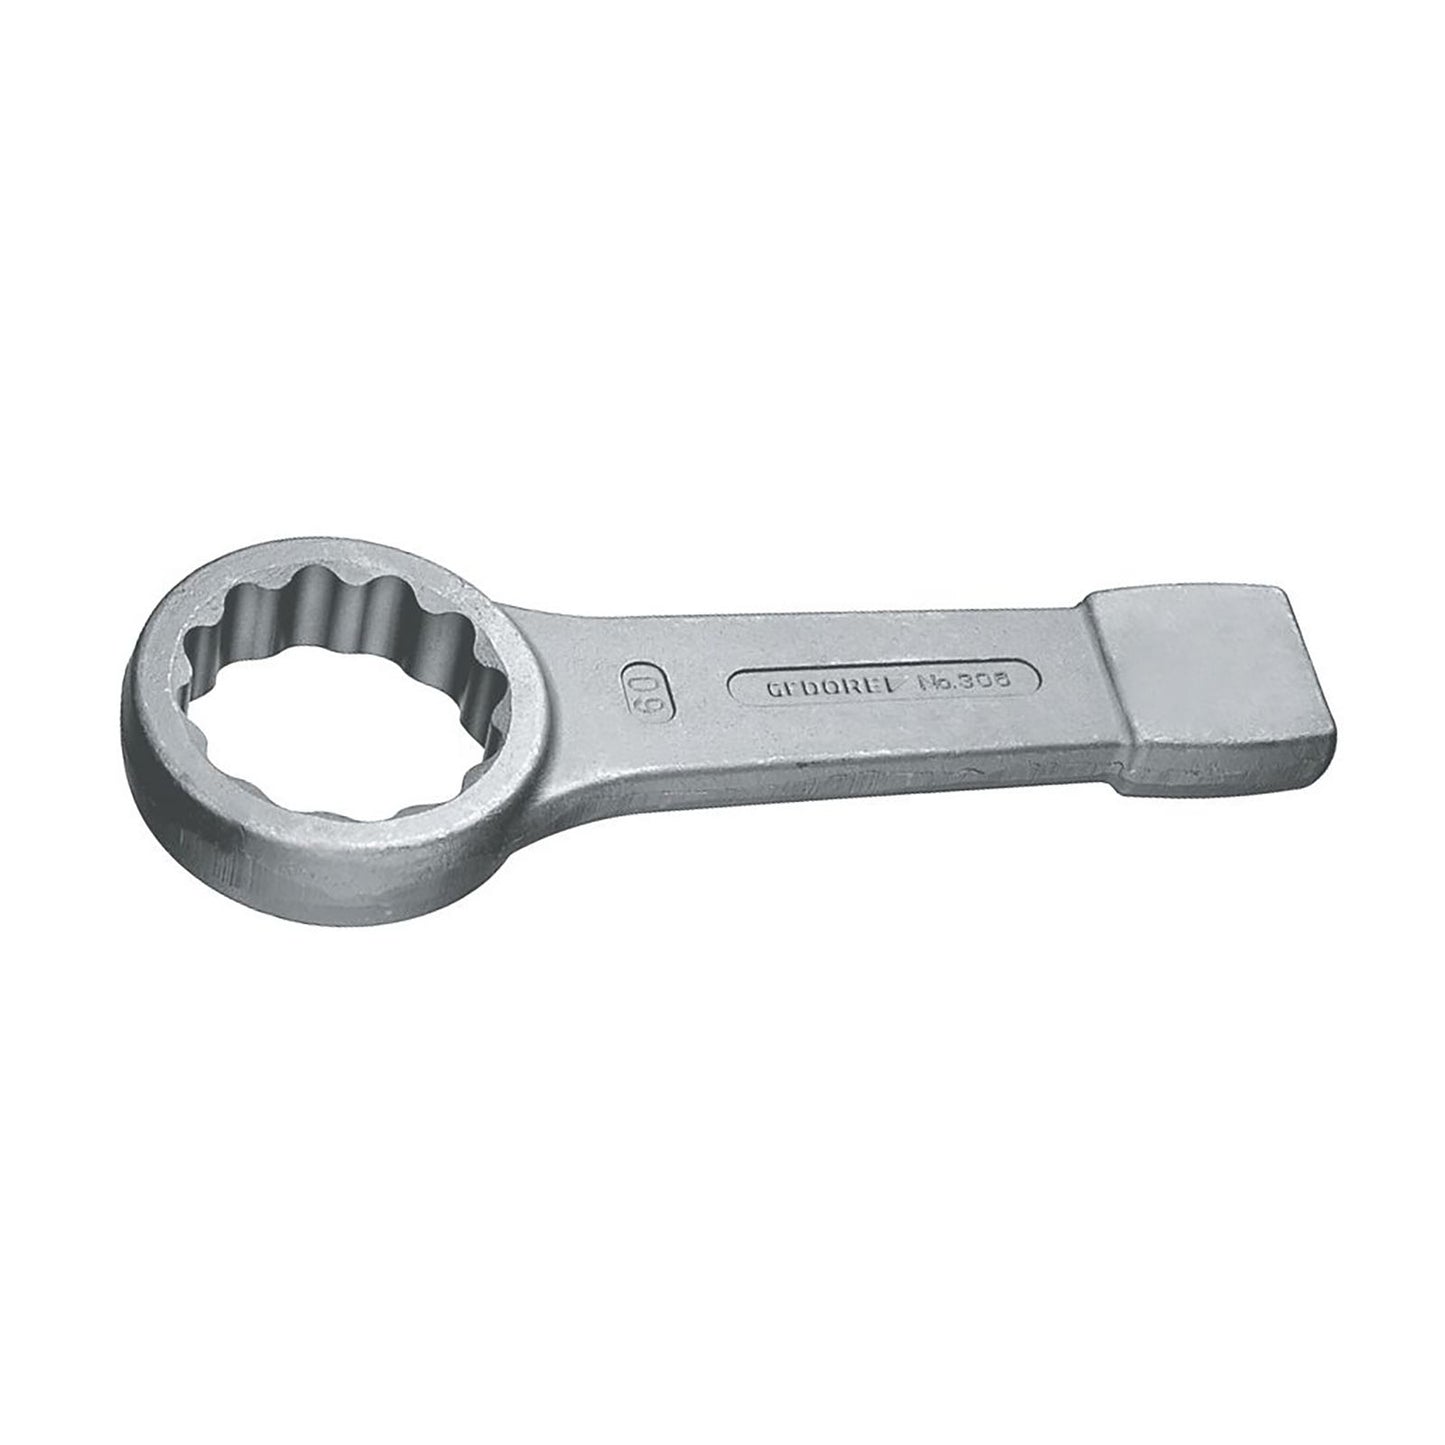 GEDORE 306 27 - Closed Strike Wrench, 27mm (6475190)